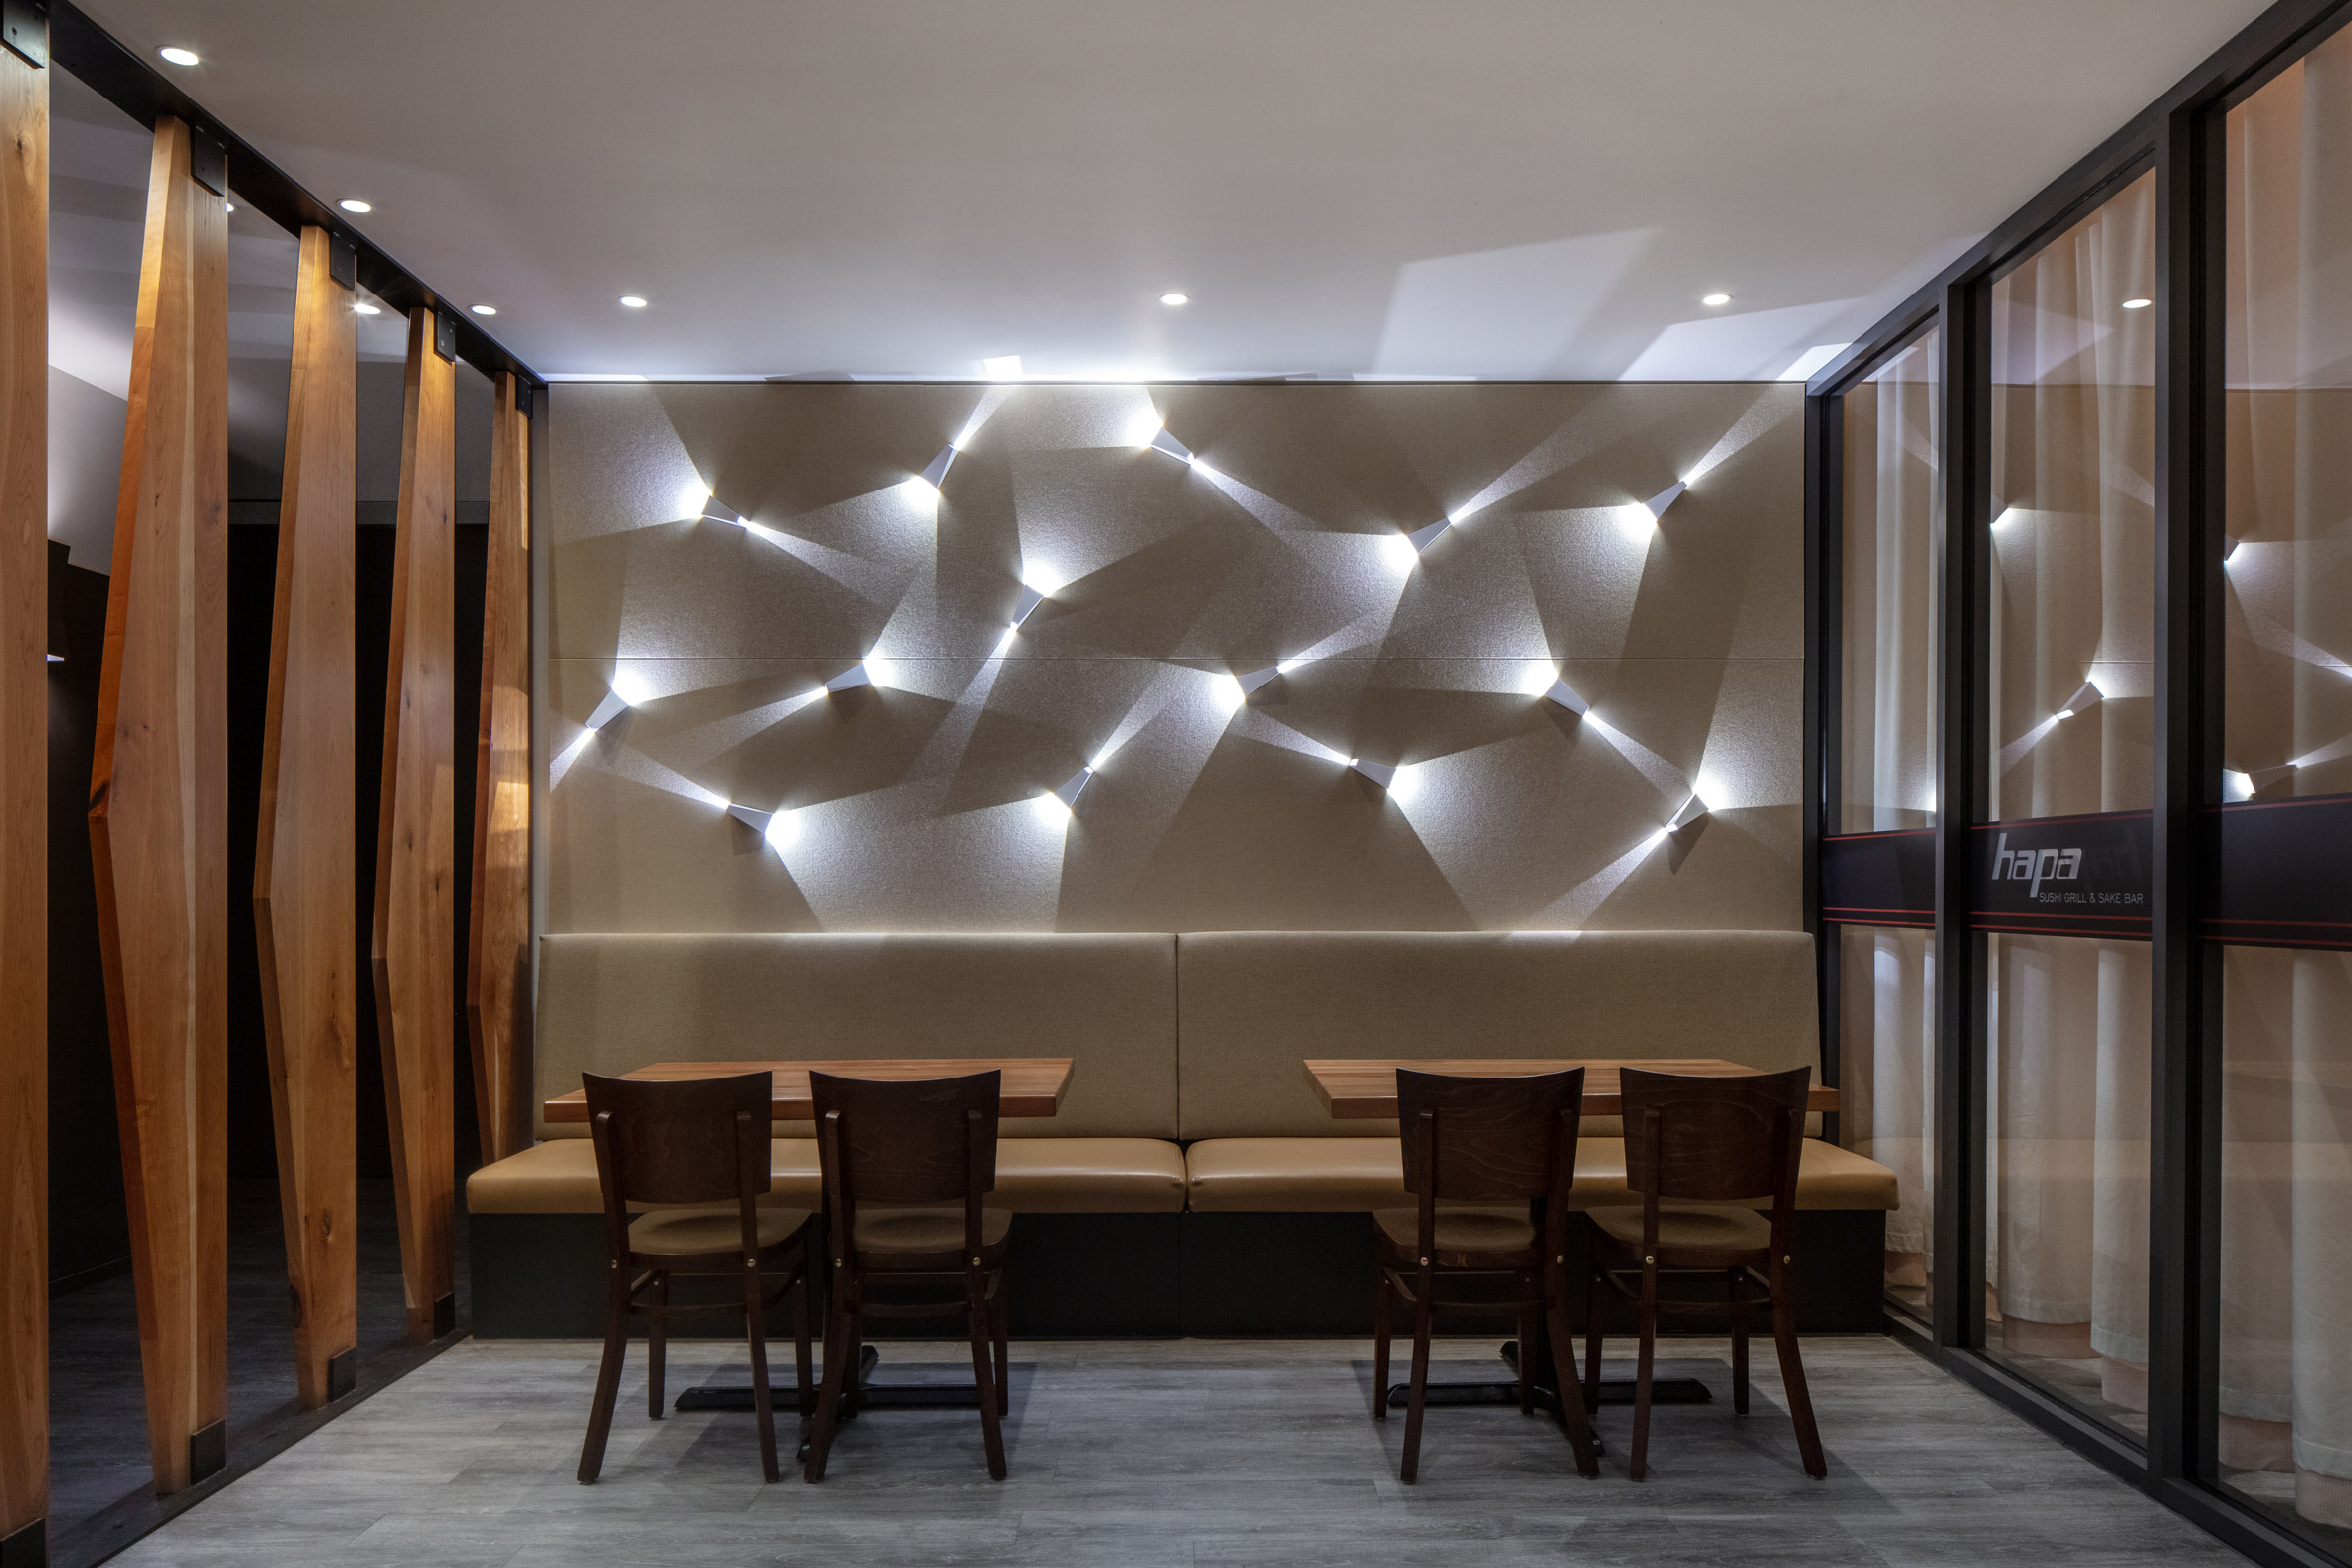 Hapa Sushi by Roth Sheppard Architects